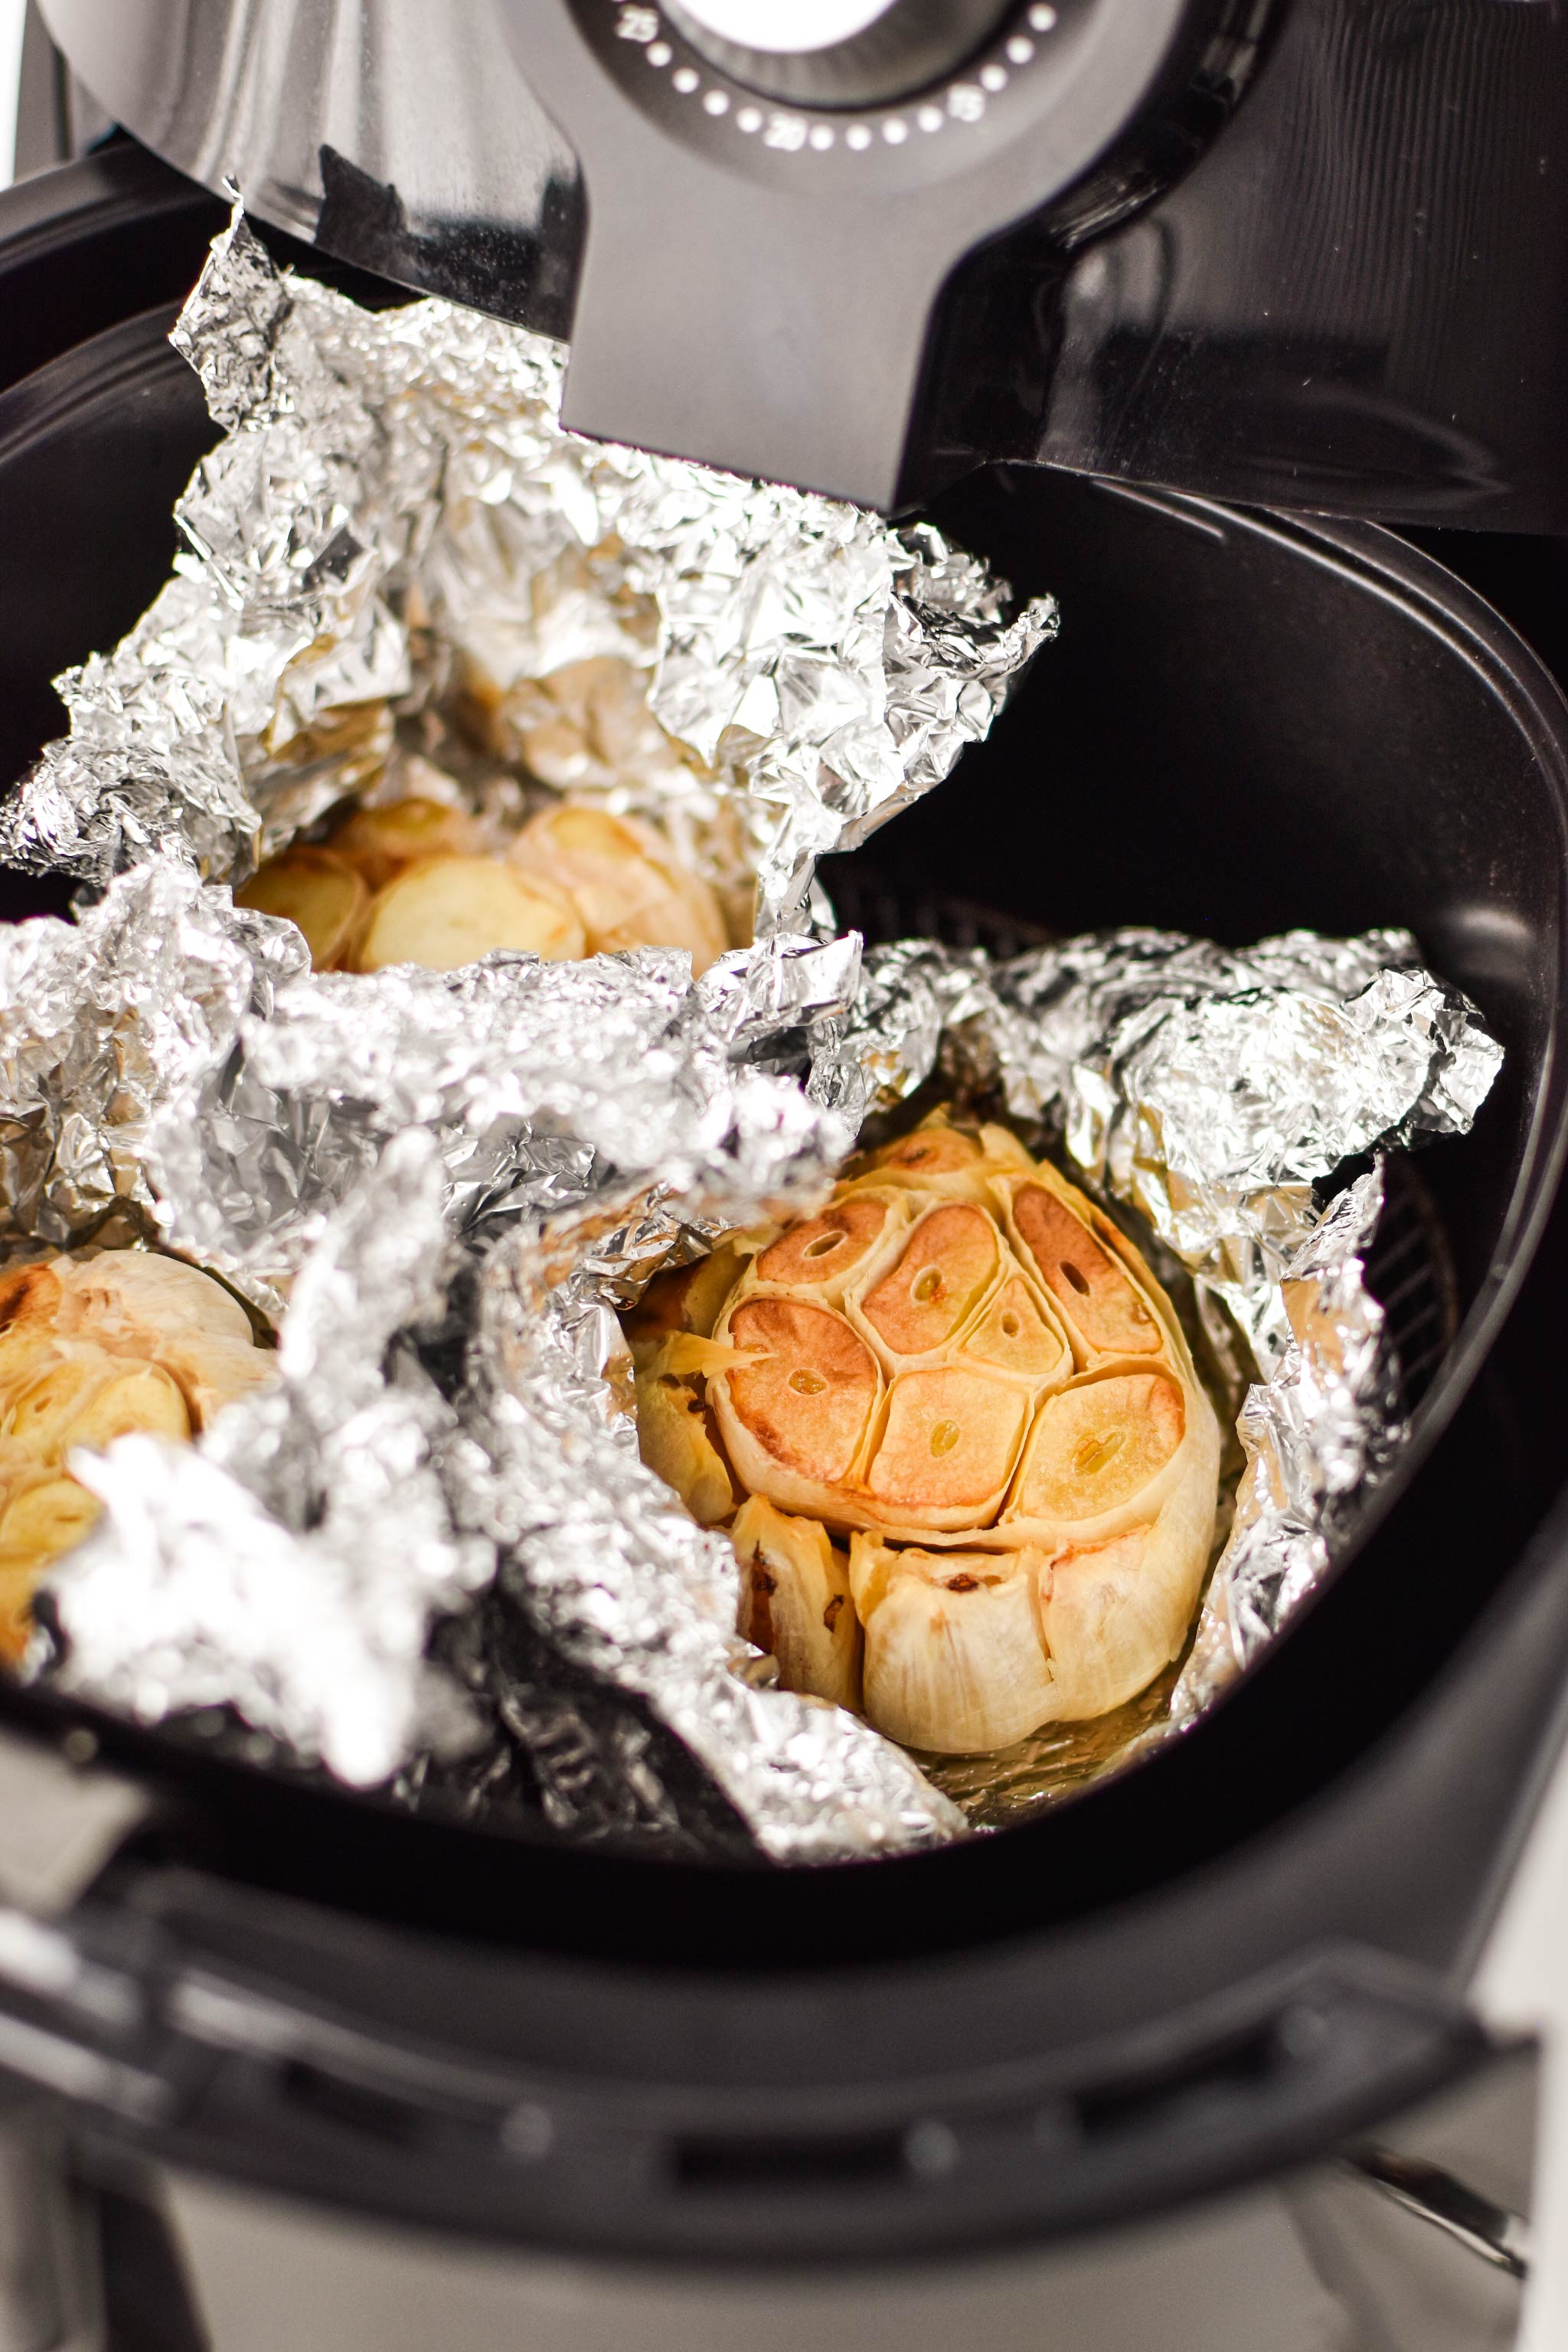 How to Line a Baking Pan with Aluminum Foil